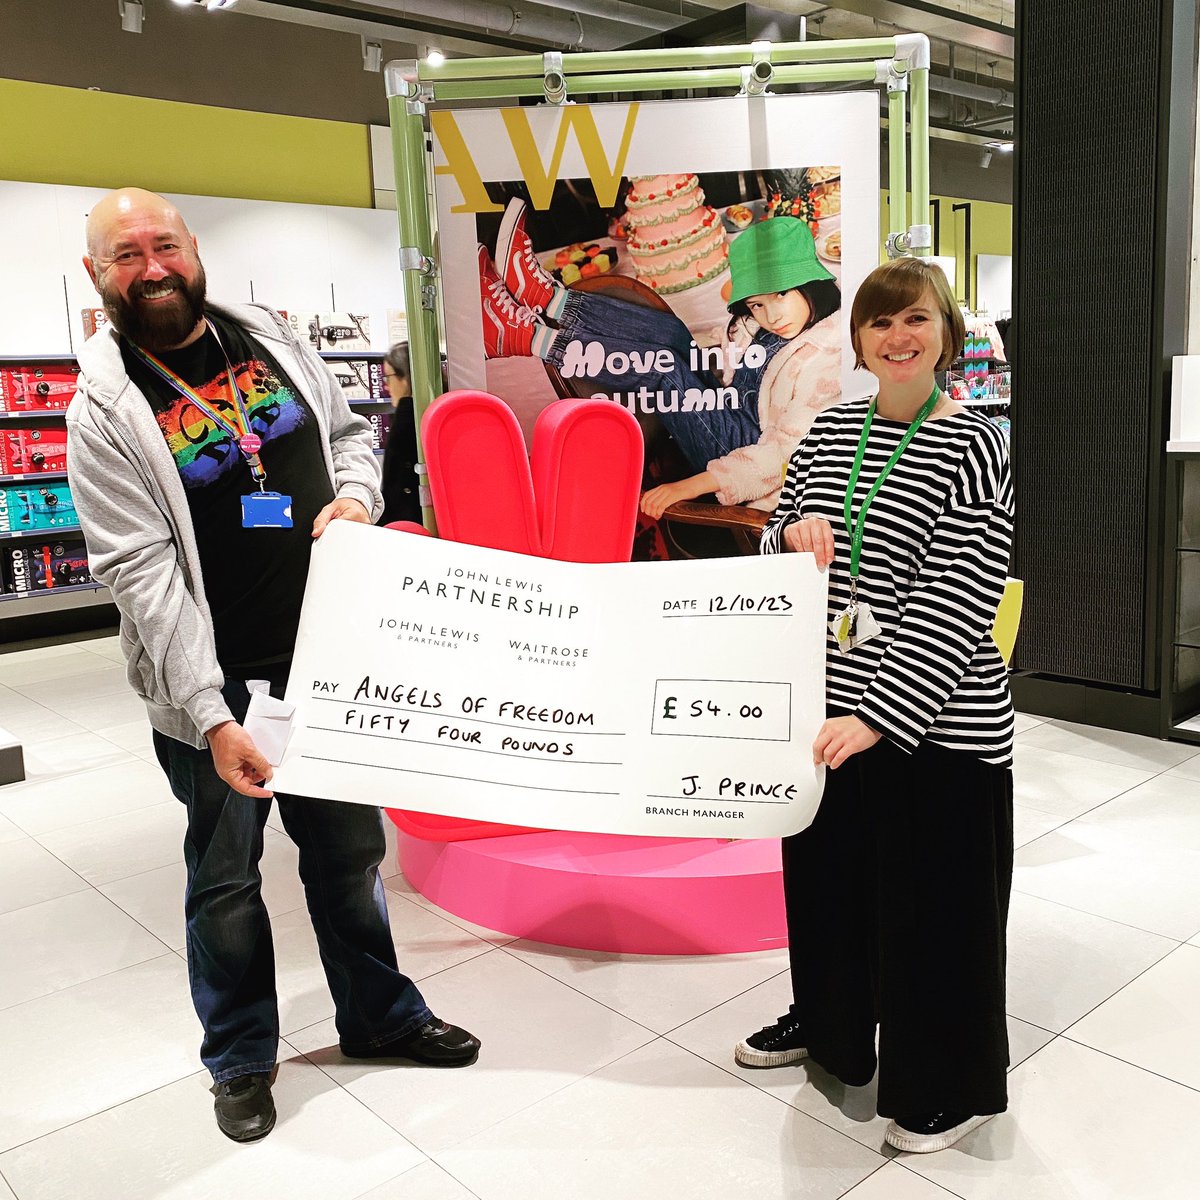 Thanks so much to @JohnLewisRetail #Leeds colleagues who recently donated £54 from their fundraising efforts for us - hope to be joined by some of their team on our activities soon ❤️ #BeSafeFeelSafe #MakeFriendsInLeeds #LGBTQplus #InclusiveLeeds